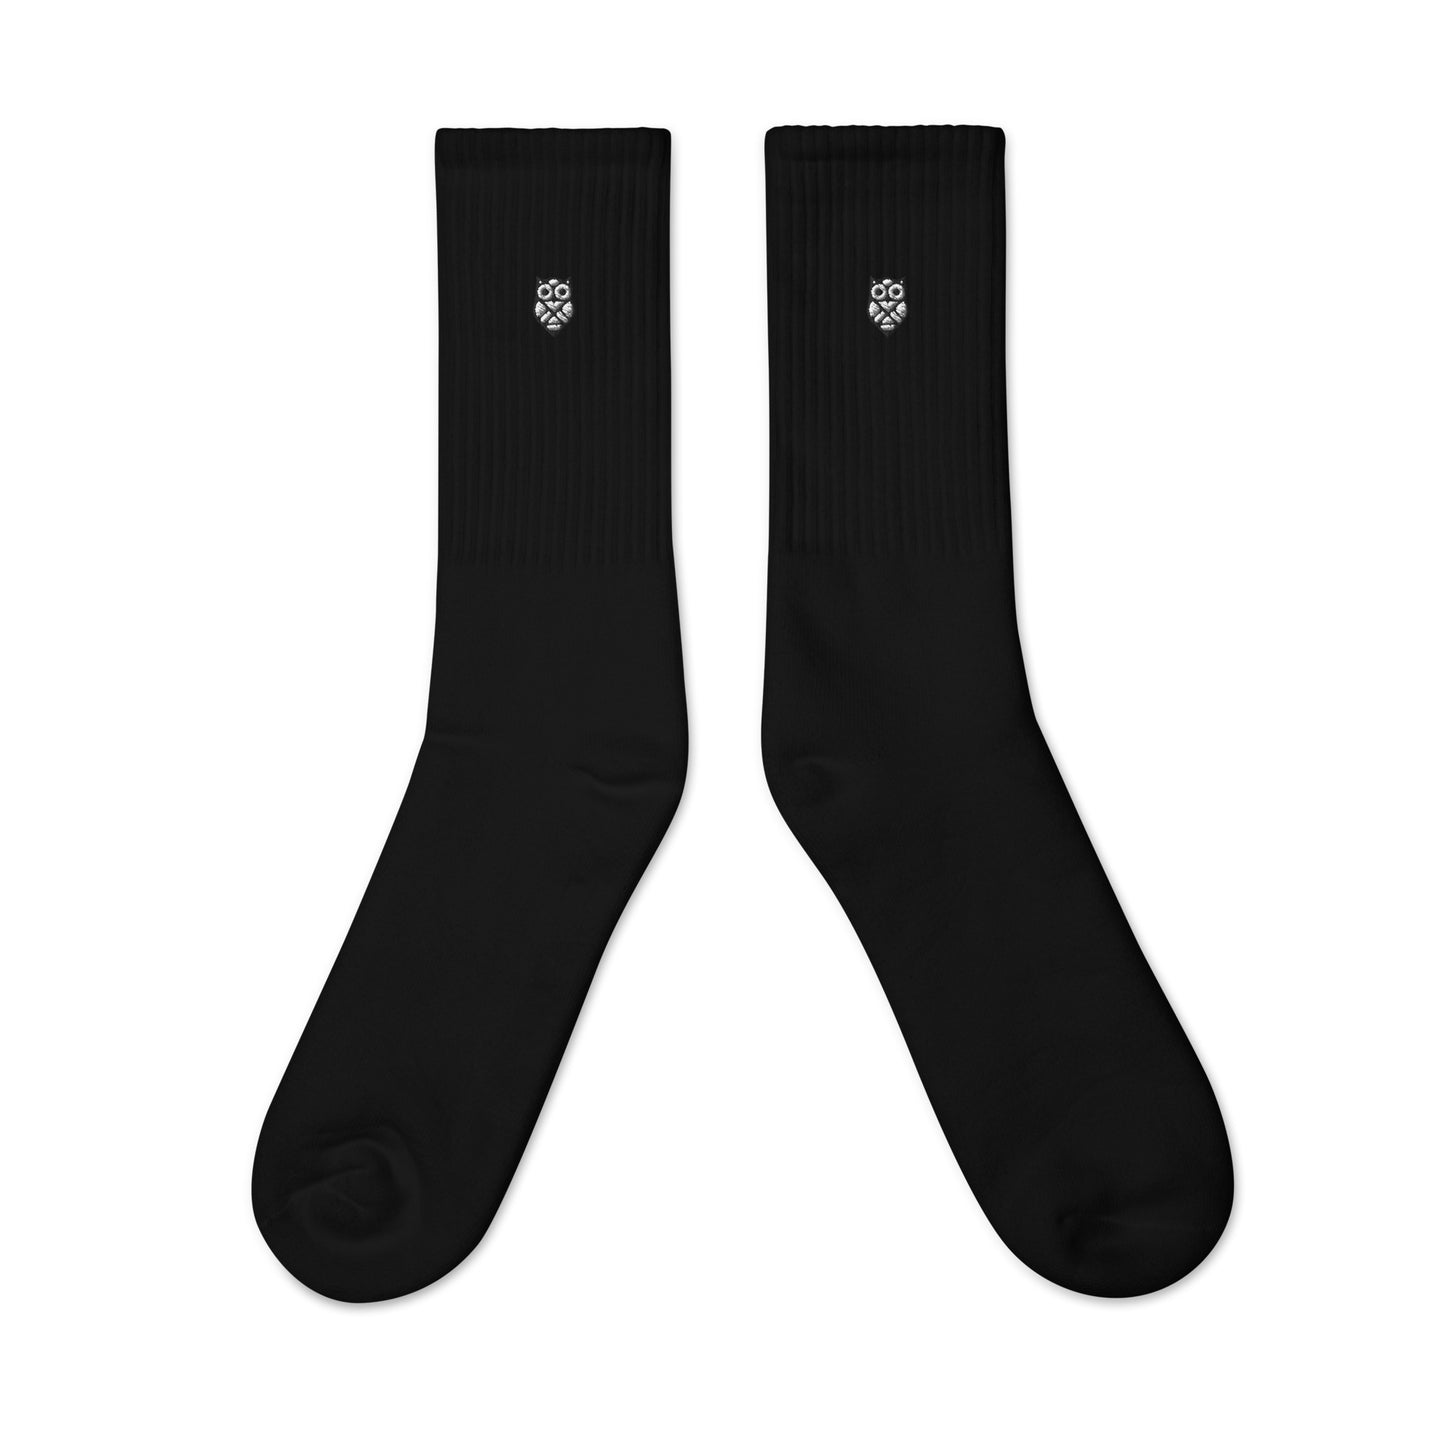 socks-from-the-front-with-owl-symbol